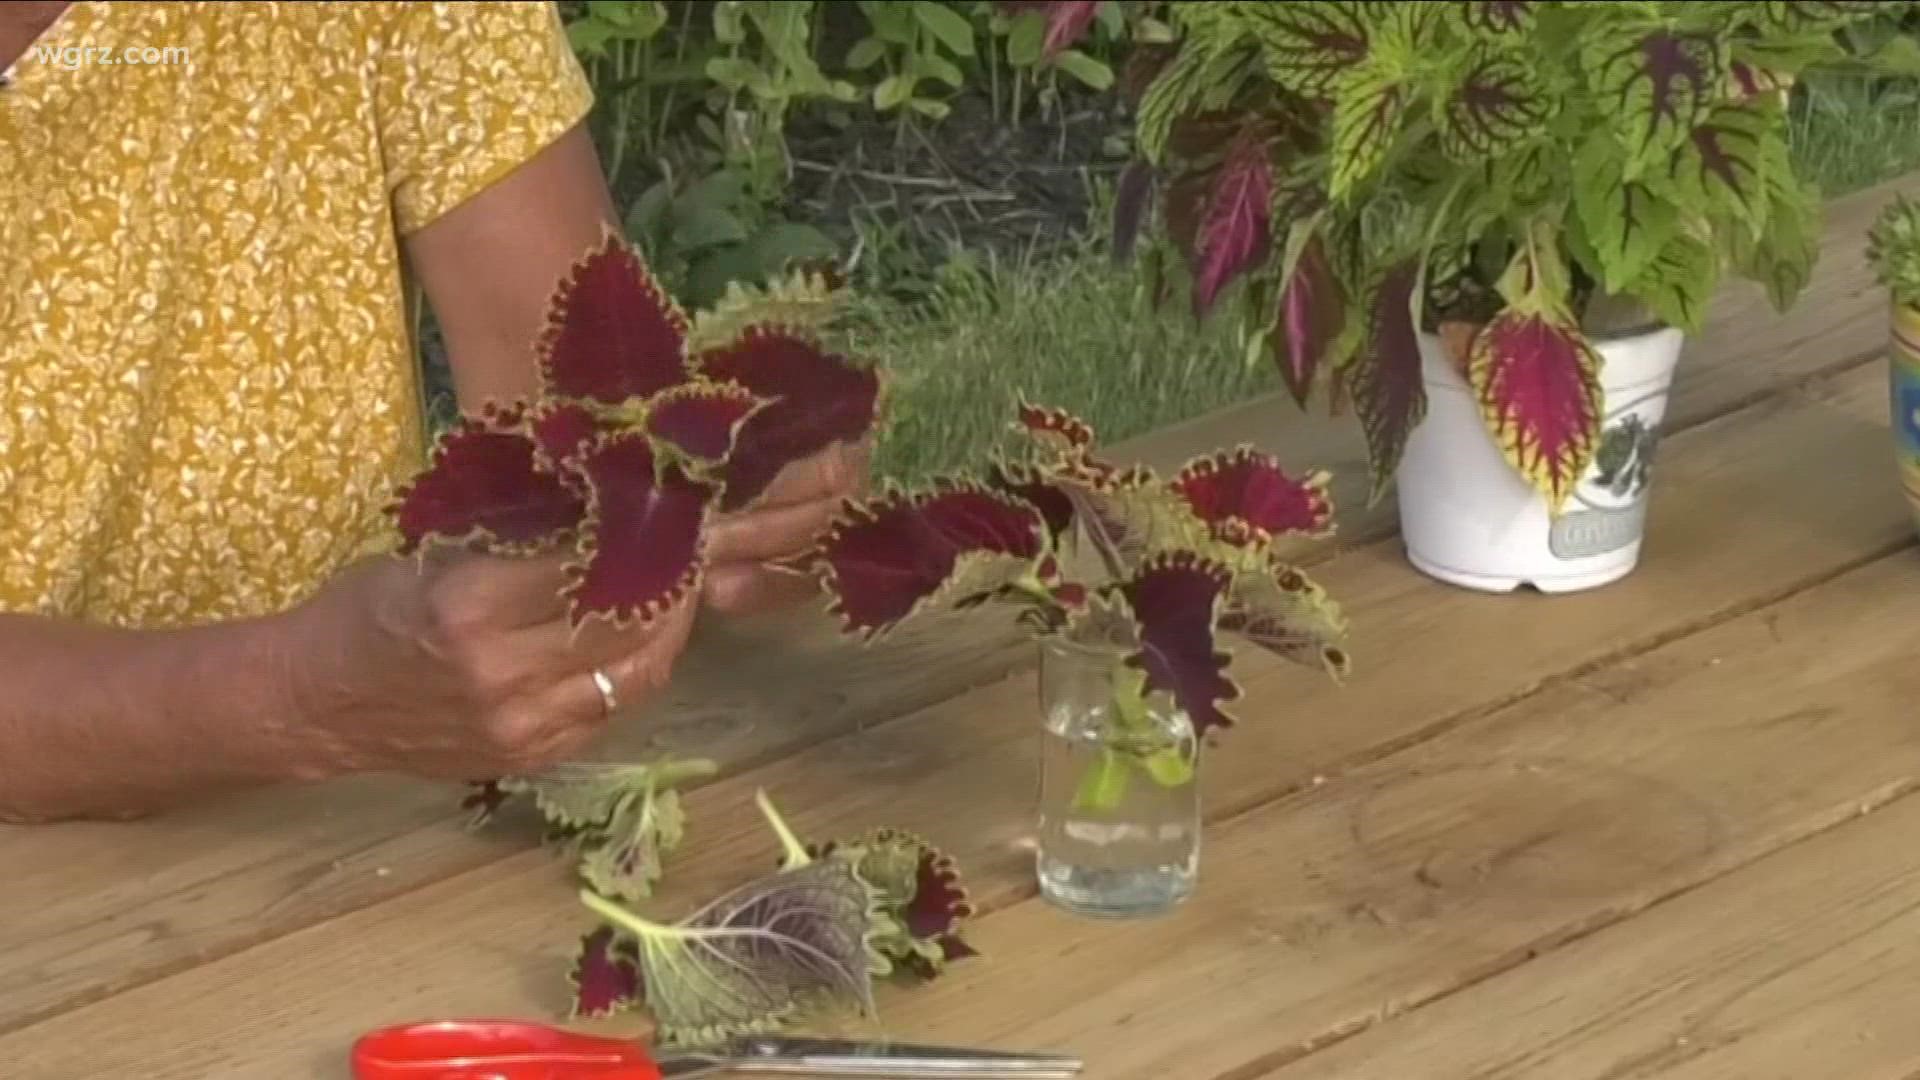 In this week's 2 the Garden, gardening expert Jackie Albarella shares a few tips about plant propagation.